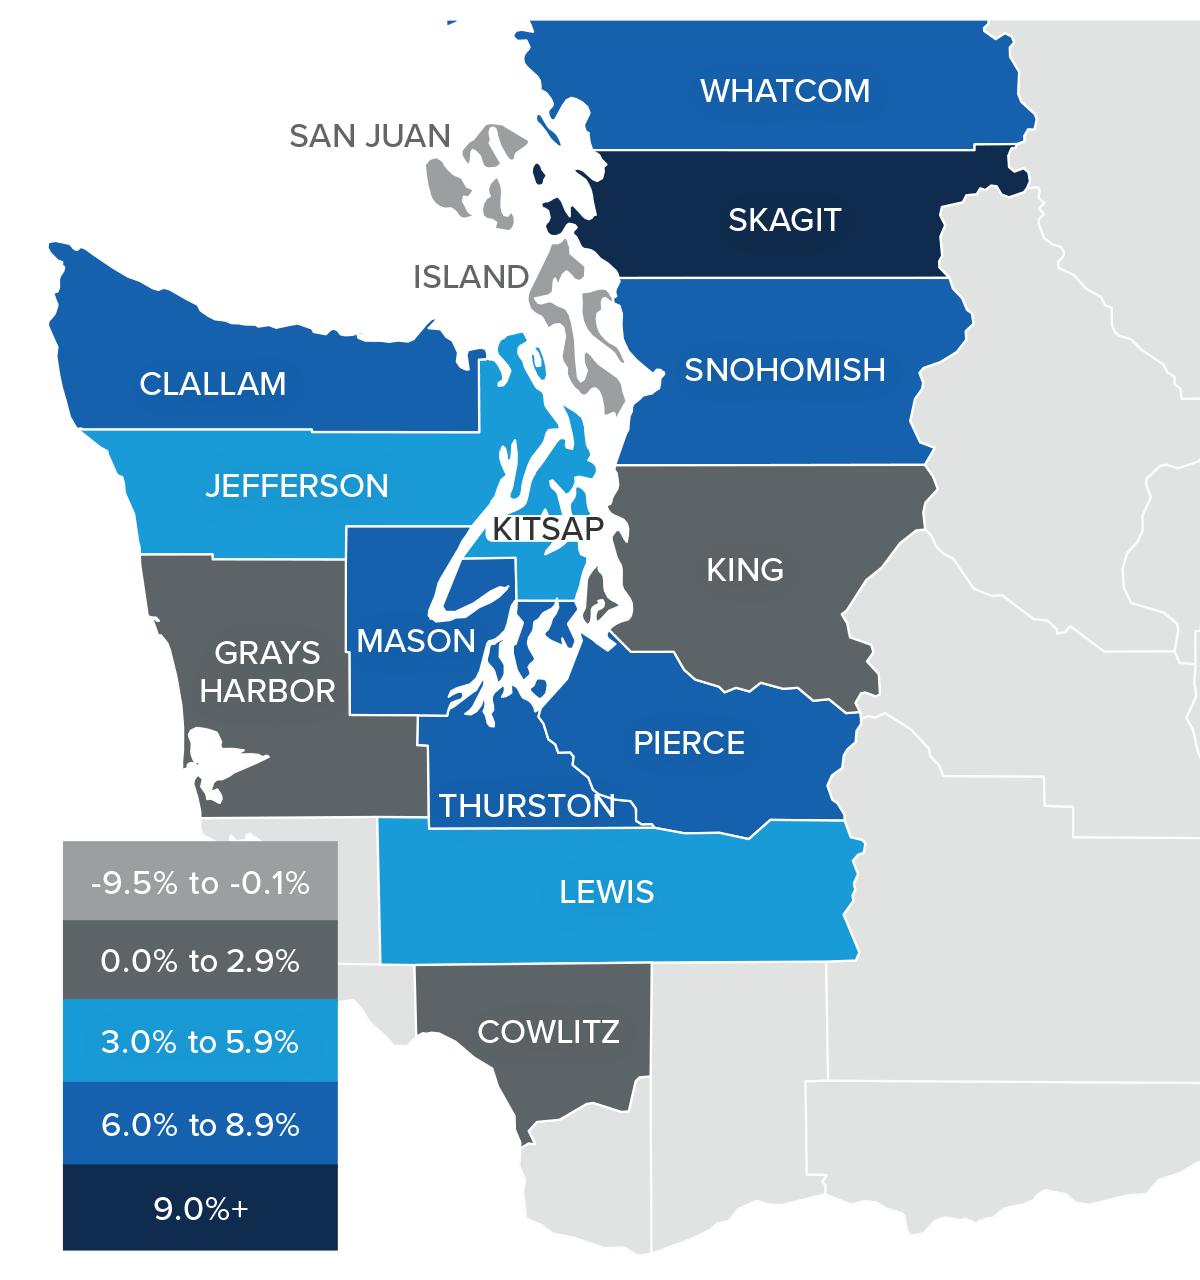 A map showing the real estate home prices percentage changes for various counties in Western Washington. Different colors correspond to different tiers of percentage change. Skagit County is the only county with a percentage change in the 9%+ range, Whatcom, Snohomish, Pierce, Thurston, Mason, and Clallam counties are in the 6% to 8.9% change range, Lewis, Kitsap, and Jefferson are in the 3% to 5.9% change range, Grays Harbor and King counties are in the 0% to 2.9% change range, and San Juan and Island counties are in the -9.5% to -0.1% change range.